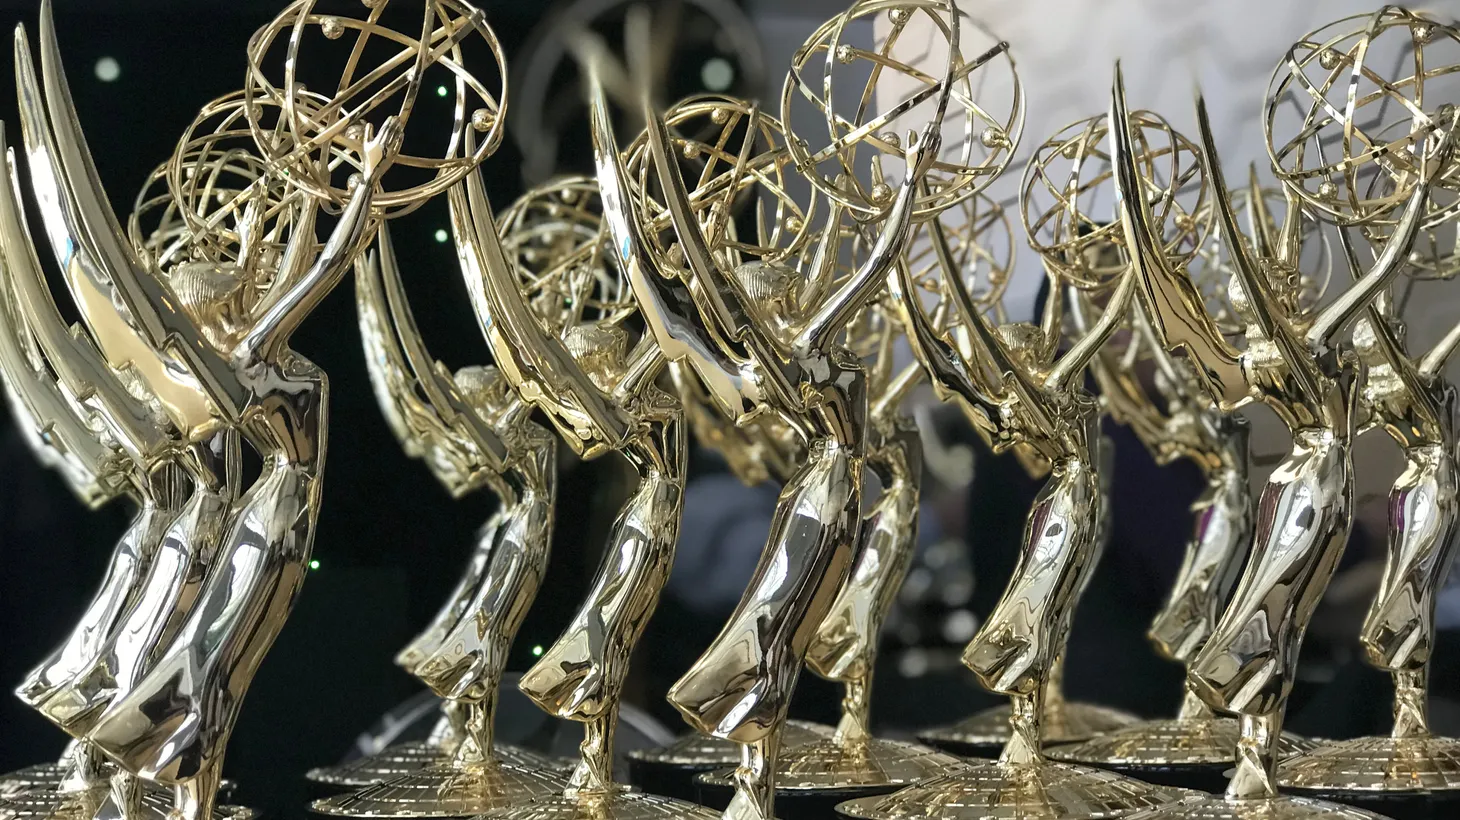 Emmy statues are displayed at the 70th Primetime Emmy Awards held at Microsoft Theater in Los Angeles on September 17, 2018.